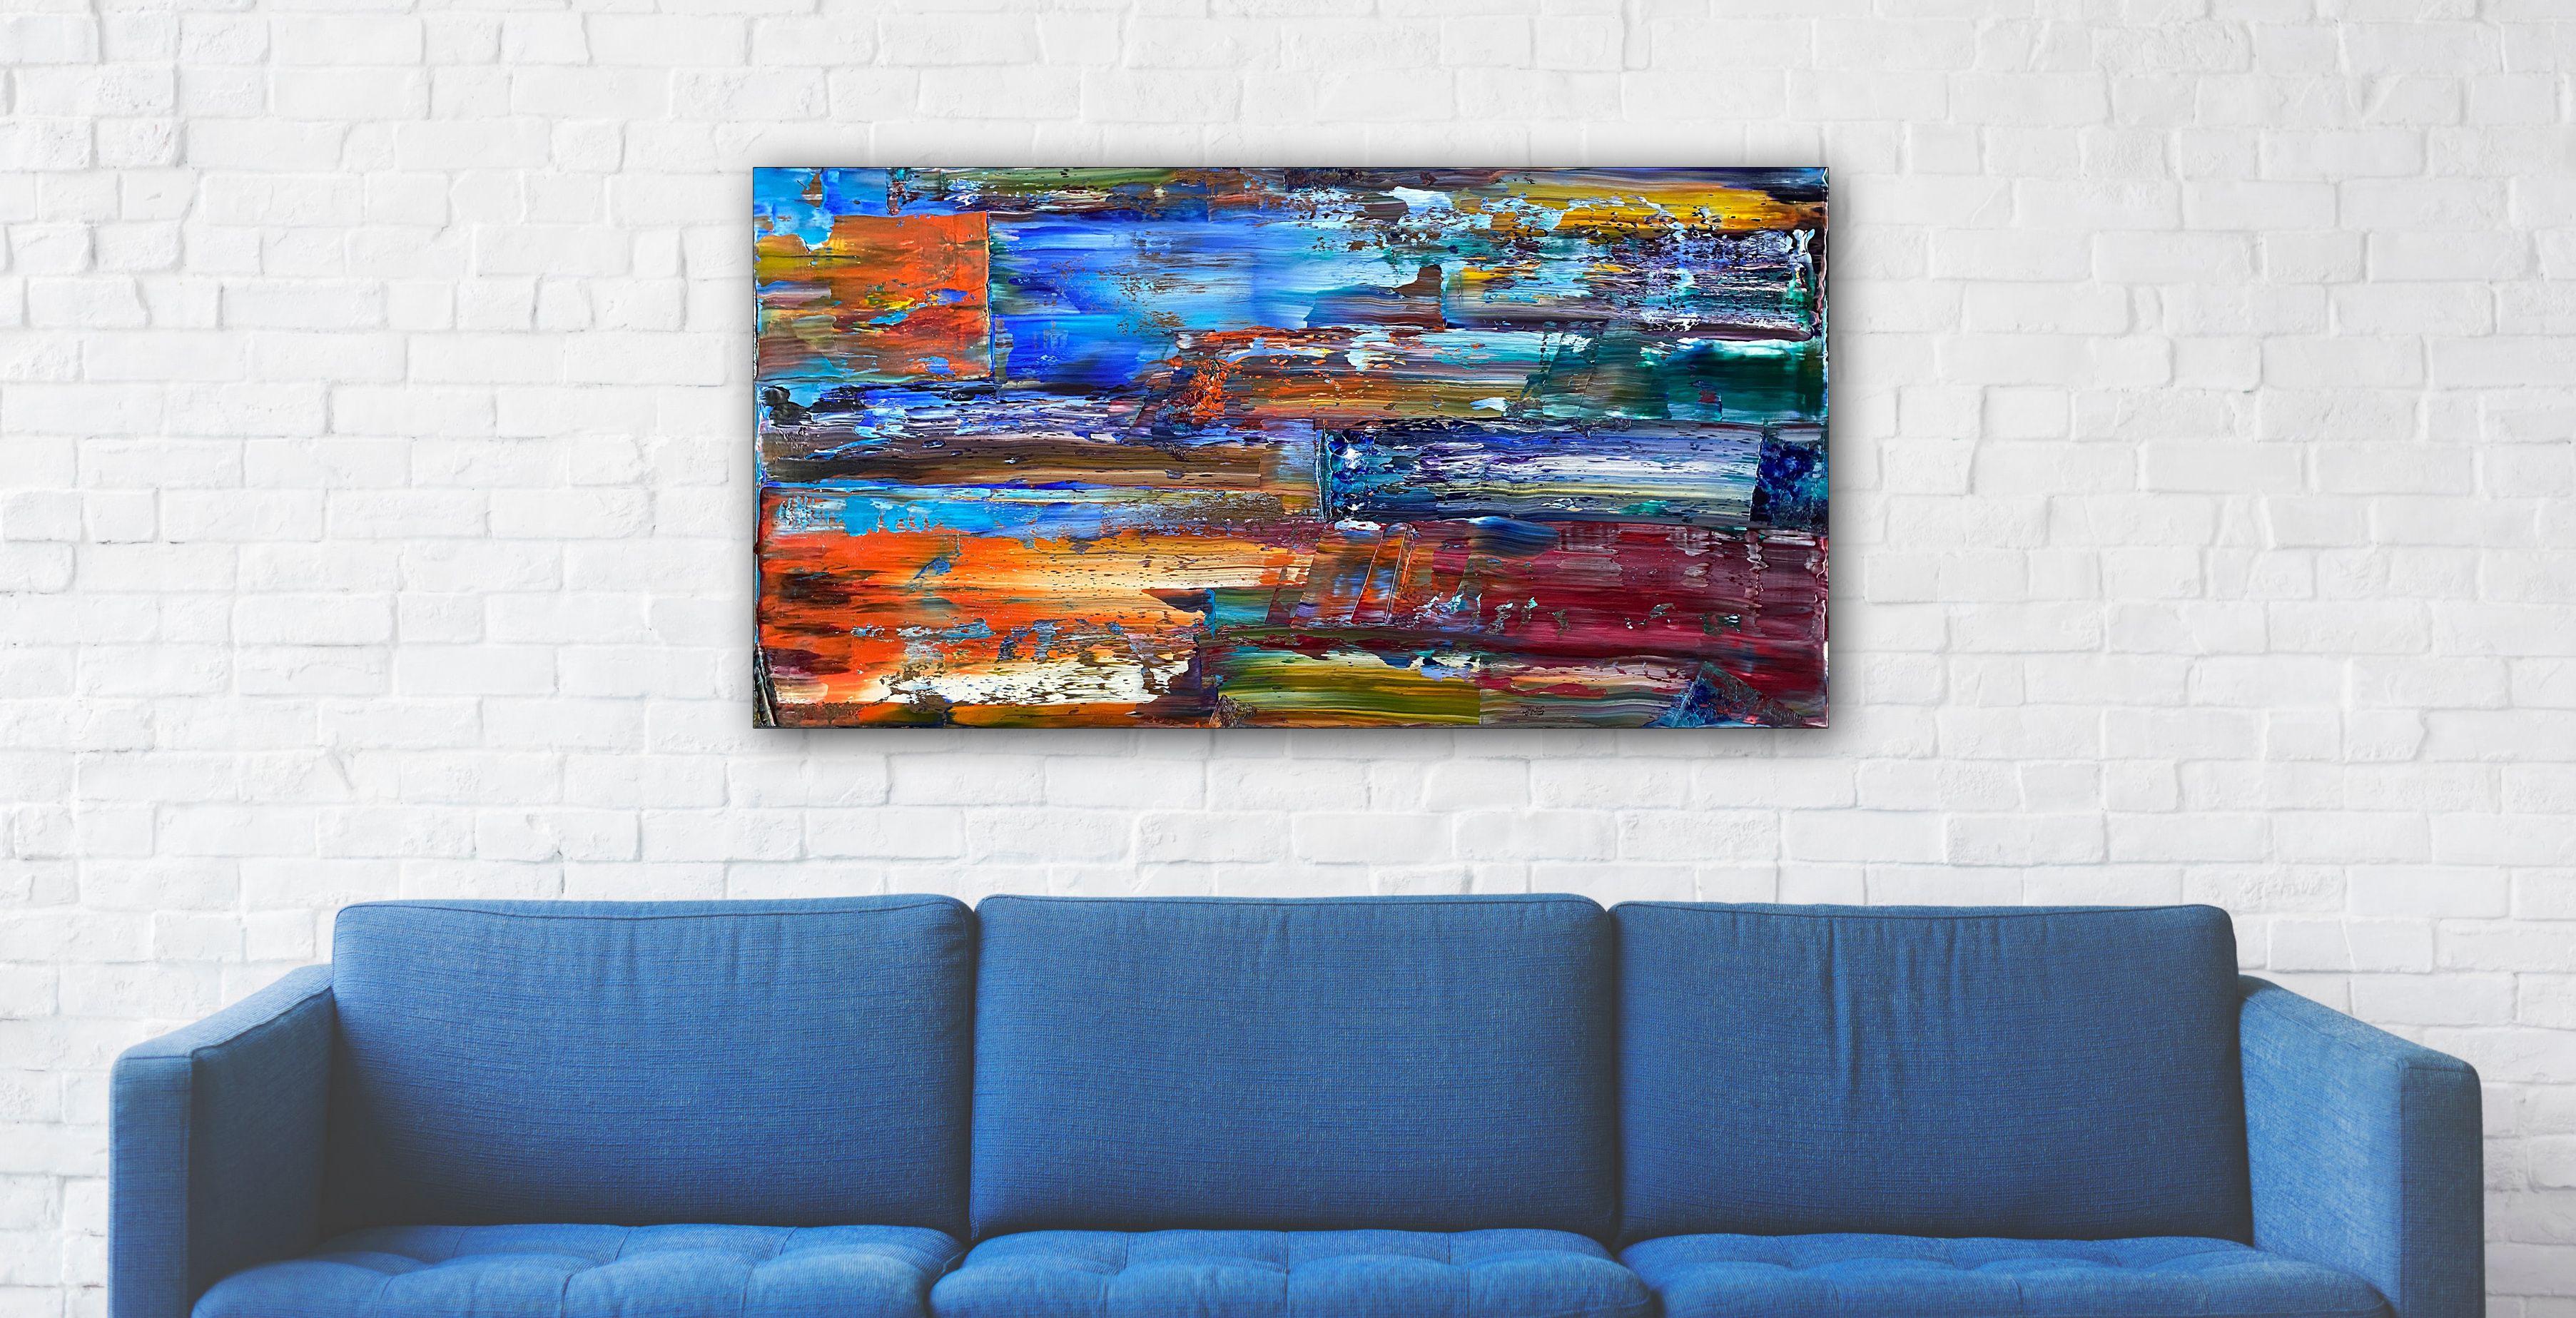 This is a completely unique and original PMS abstract oil painting on recycled wooden table top. Perfect for your living room, or to fill any large wall in your office or home. This painting epitomizes a technique and aesthetic I have been working